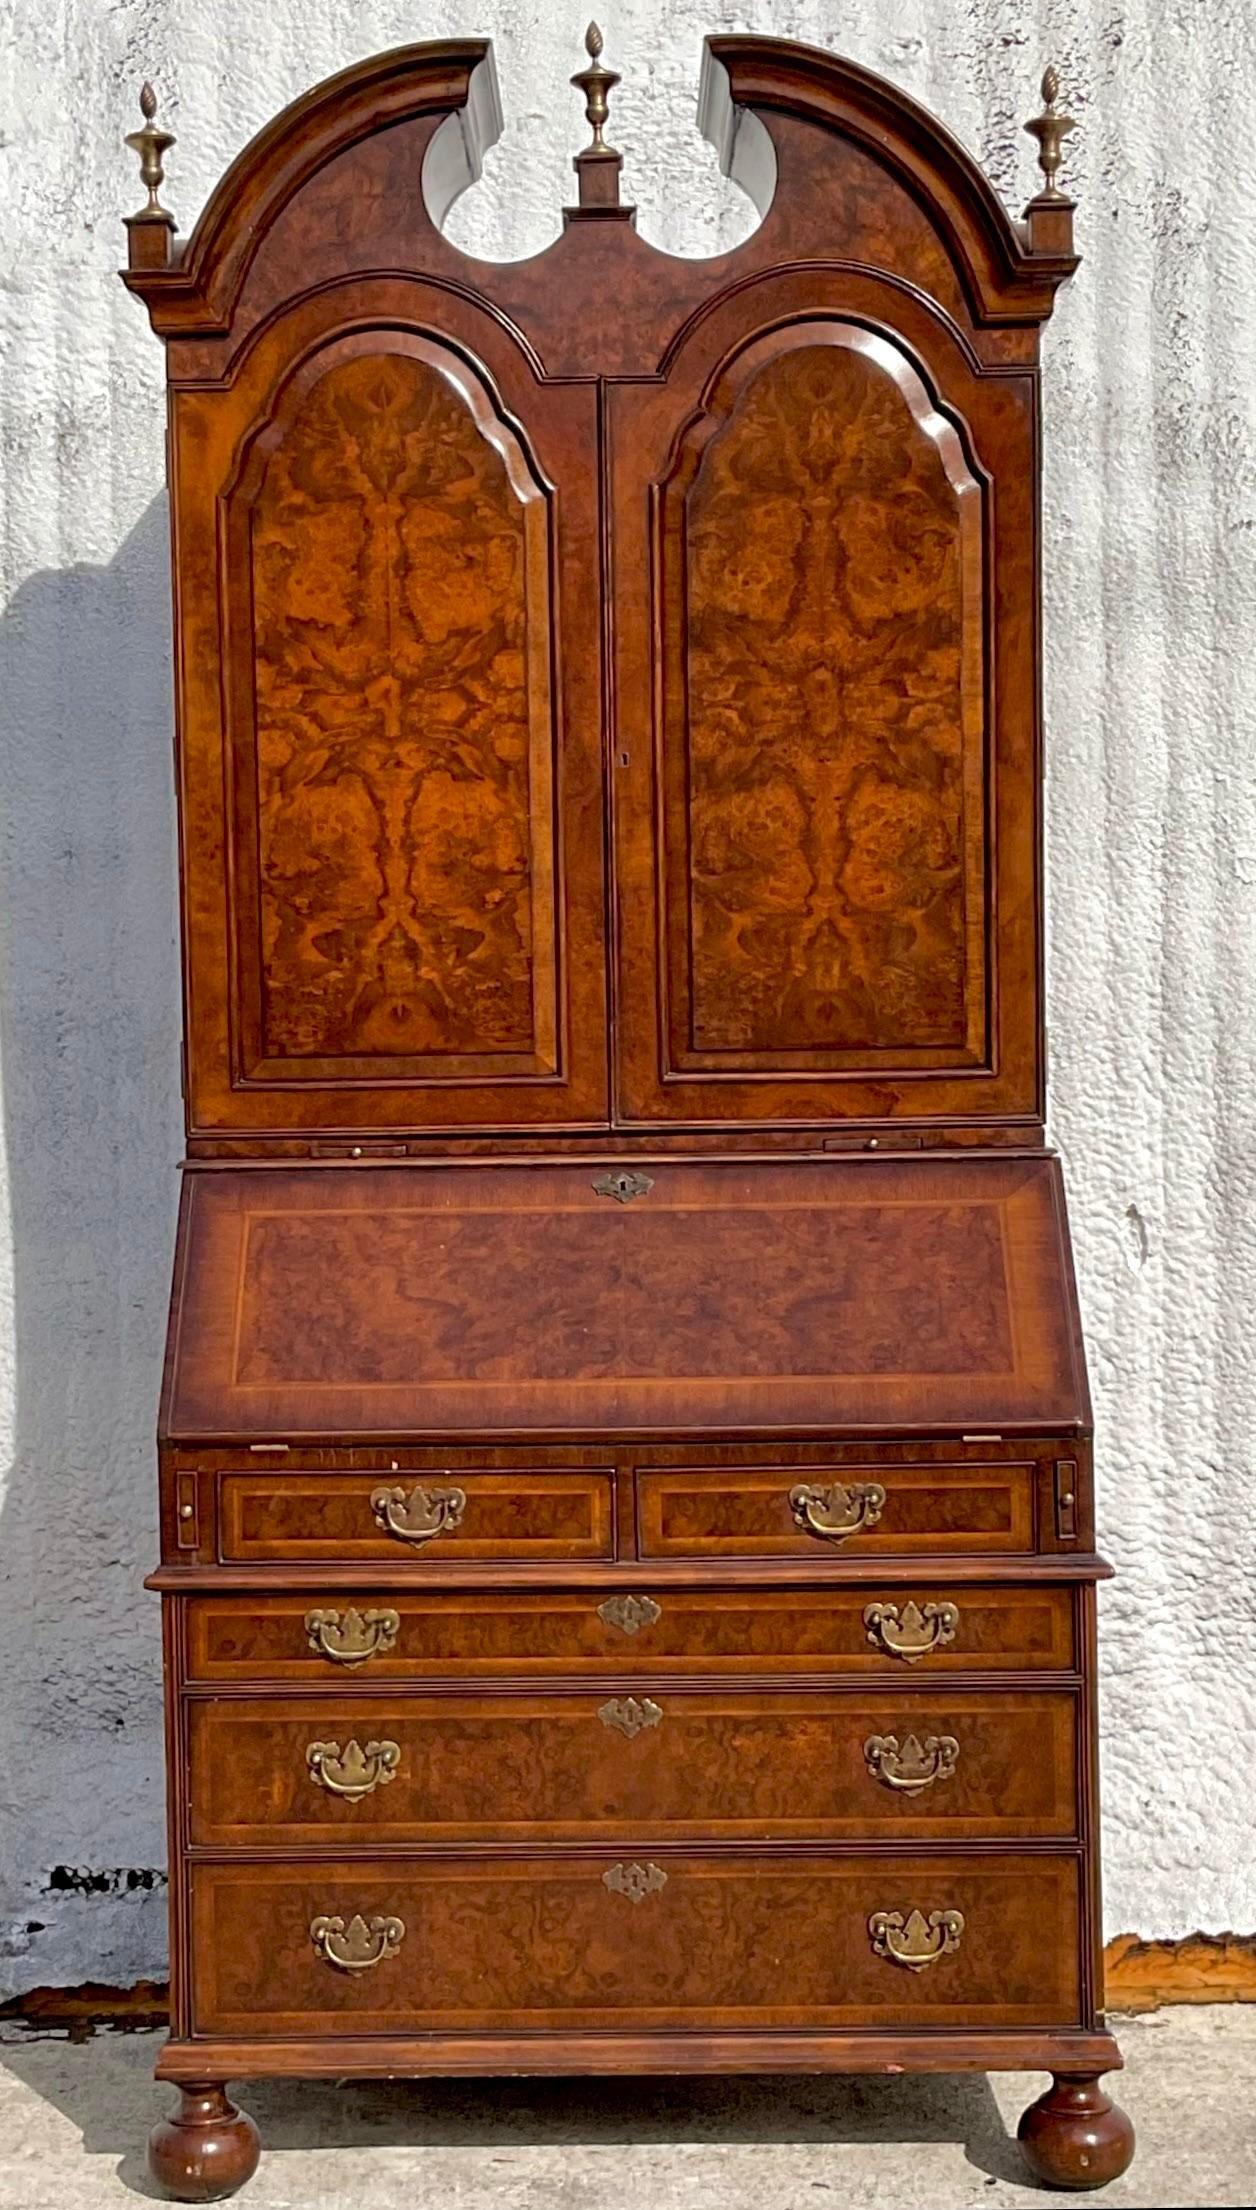 A stunning vintage Regency Secretary desk. Gorgeous Burl wood detail with incredible attention to detail. An amazing array of interior shelves and cabinets. Acquired from a Palm Beach estate.